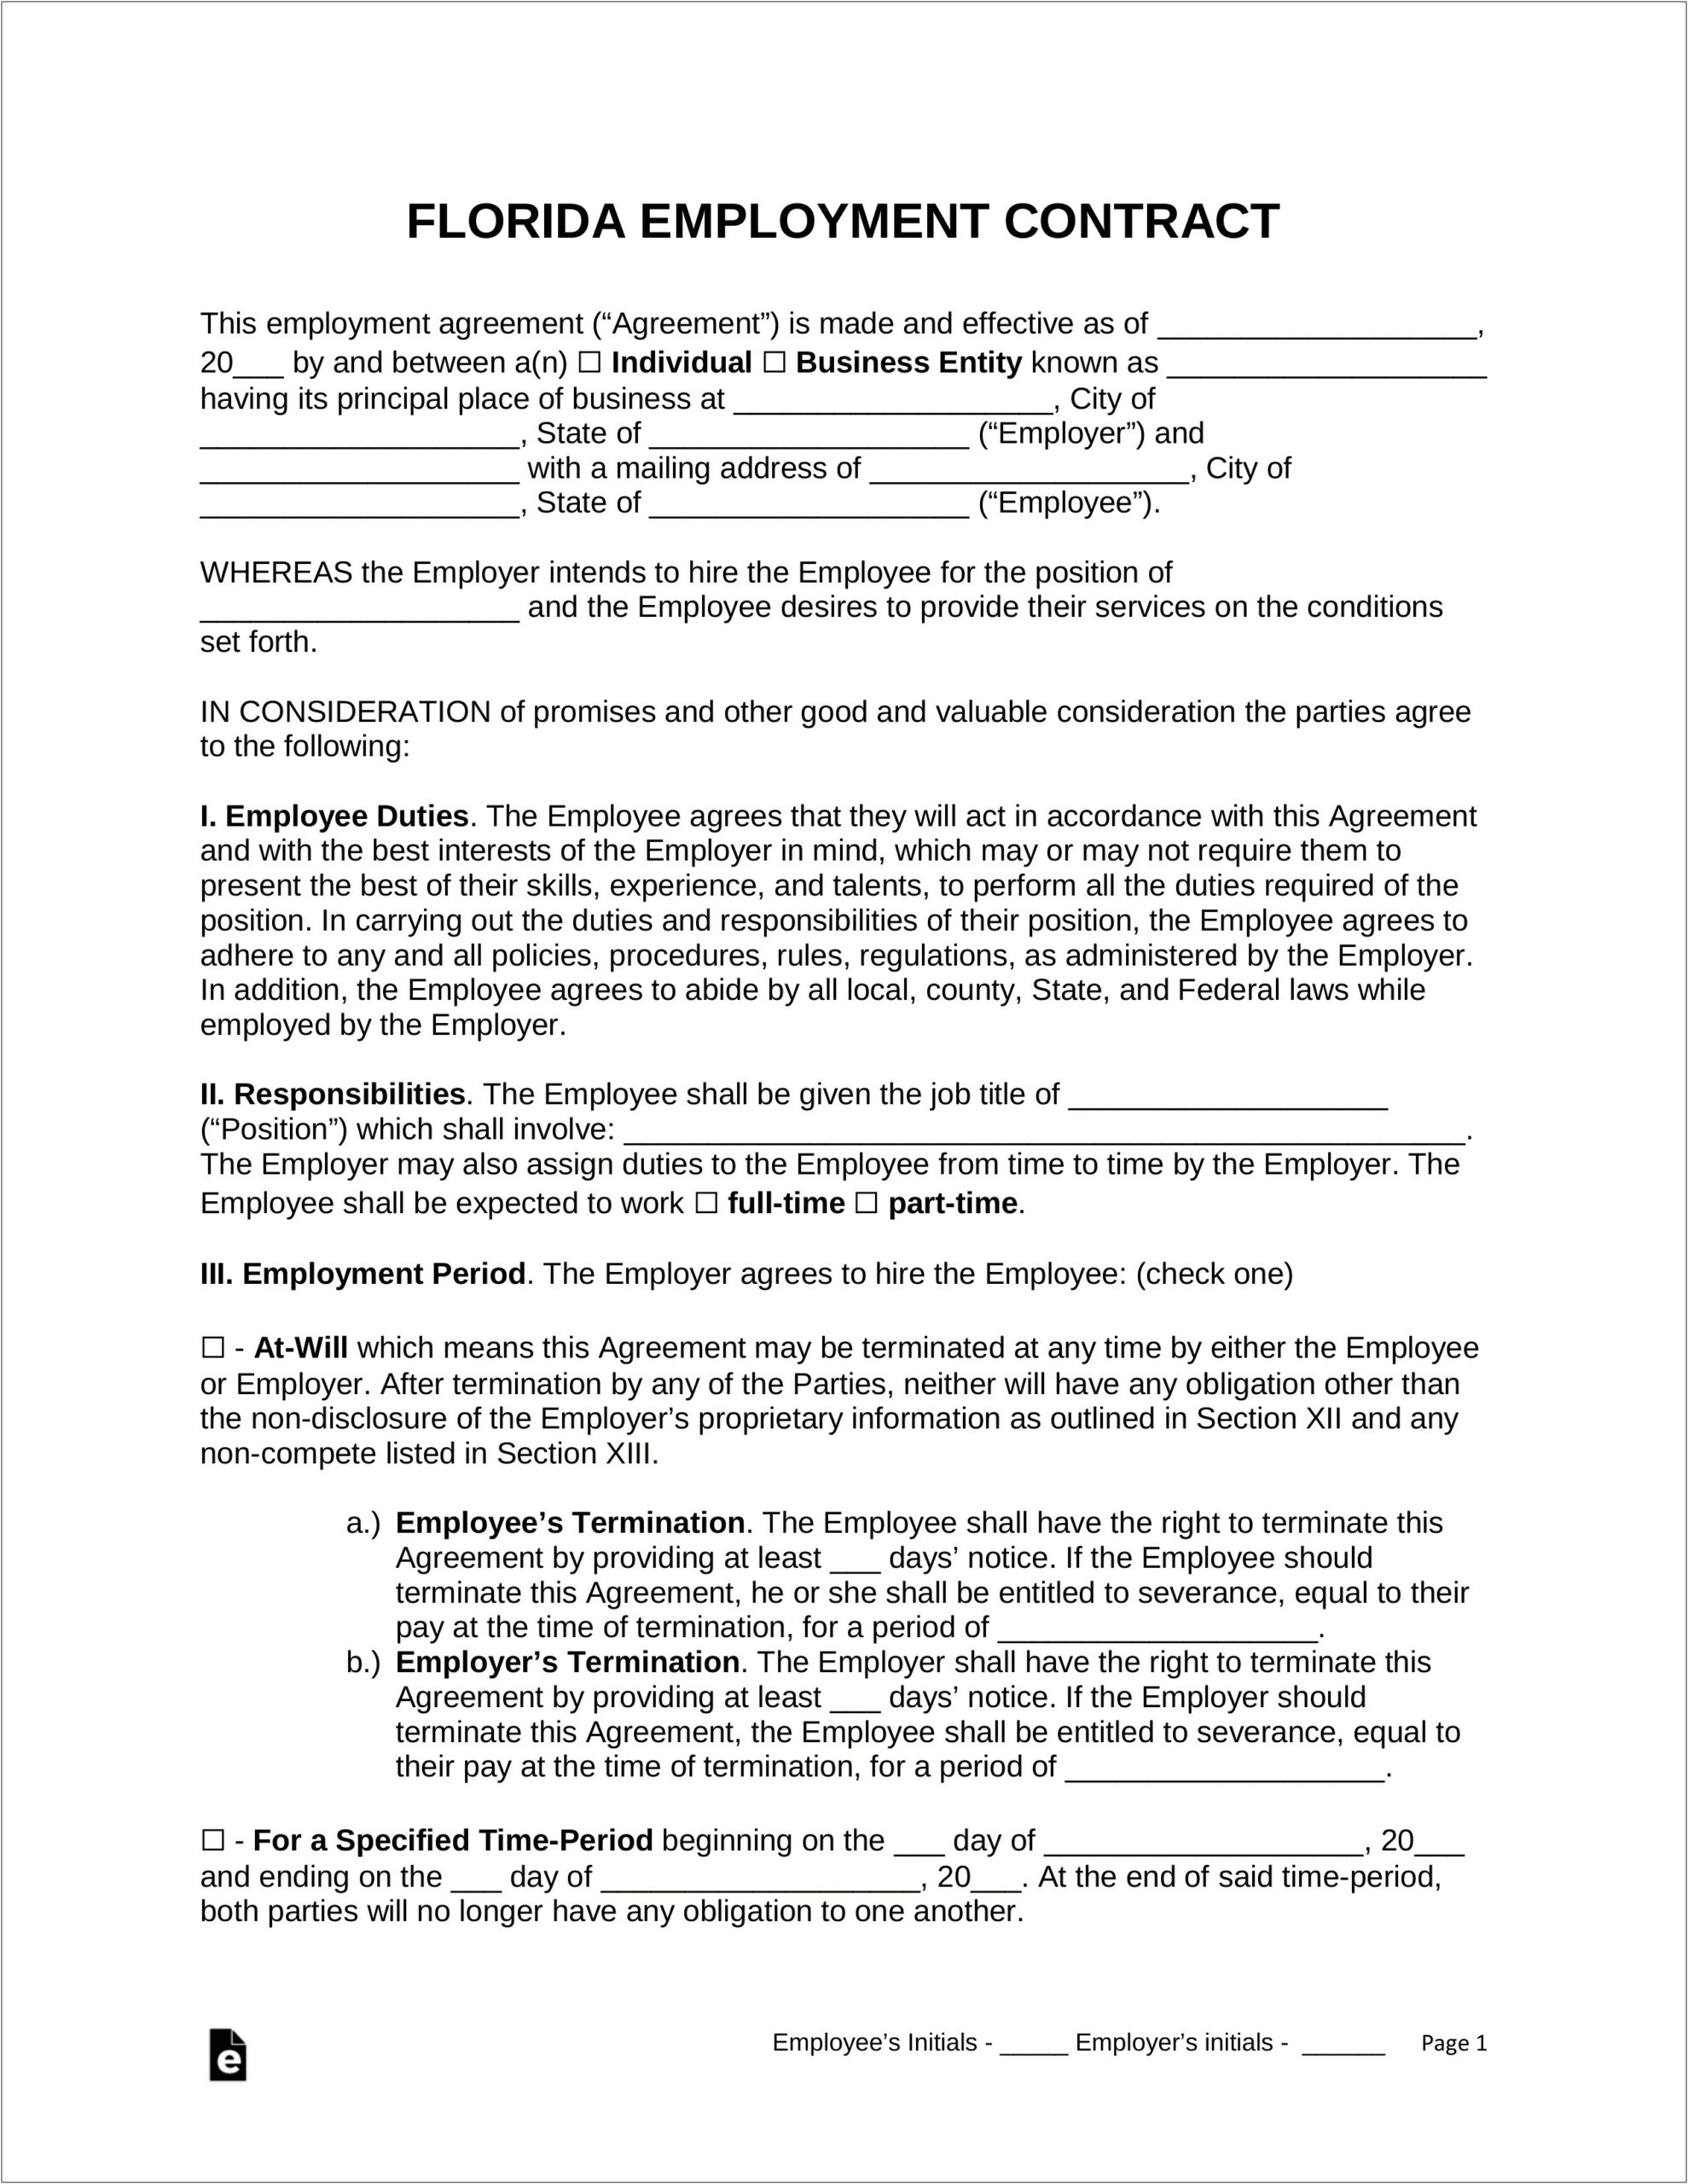 Employment Contract Template Word For Florida